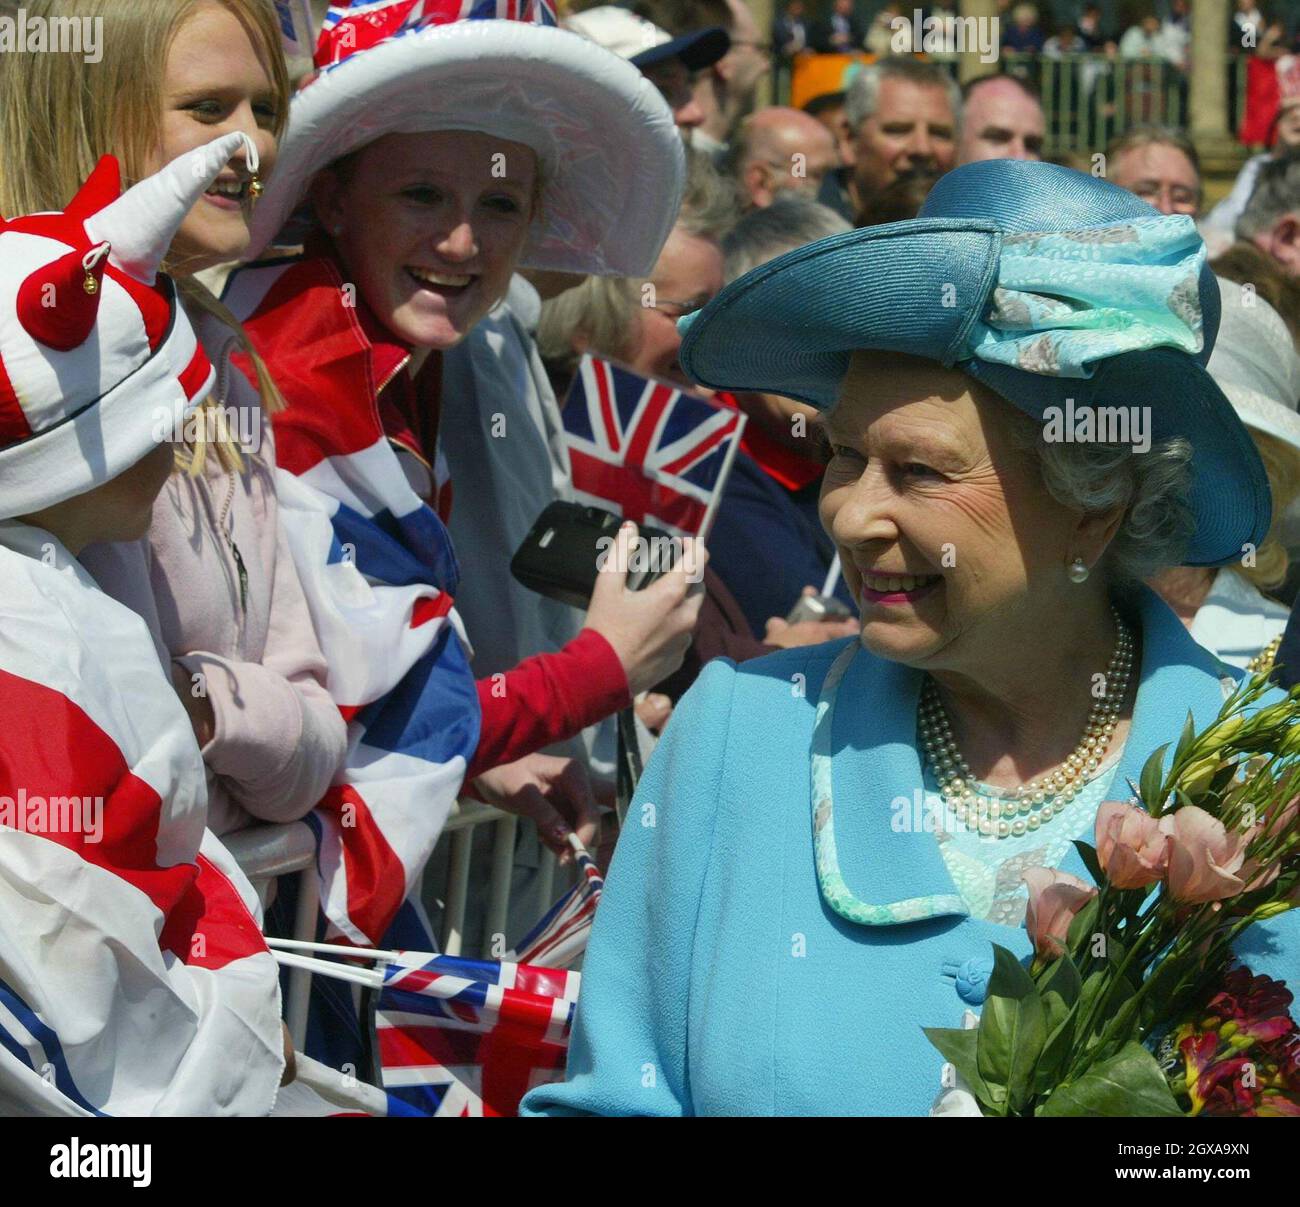 Britain's Queen Elizabeth II meets members of the public at Piece Hall in Halifax, Yorkshire, a former market place for local weavers which is now a thriving business centre for small traders specialising in creative arts Thursday May 27, 2004. She and the Duke of Edinburgh watched a performance by a local theatre group which specialises in the use of drama to build confidence in young people, and earlier the Queen he toured Halifax High School, where an 11-year-old pupil presented her with a posy - after he had looked at a coin to see who she was.   Stock Photo